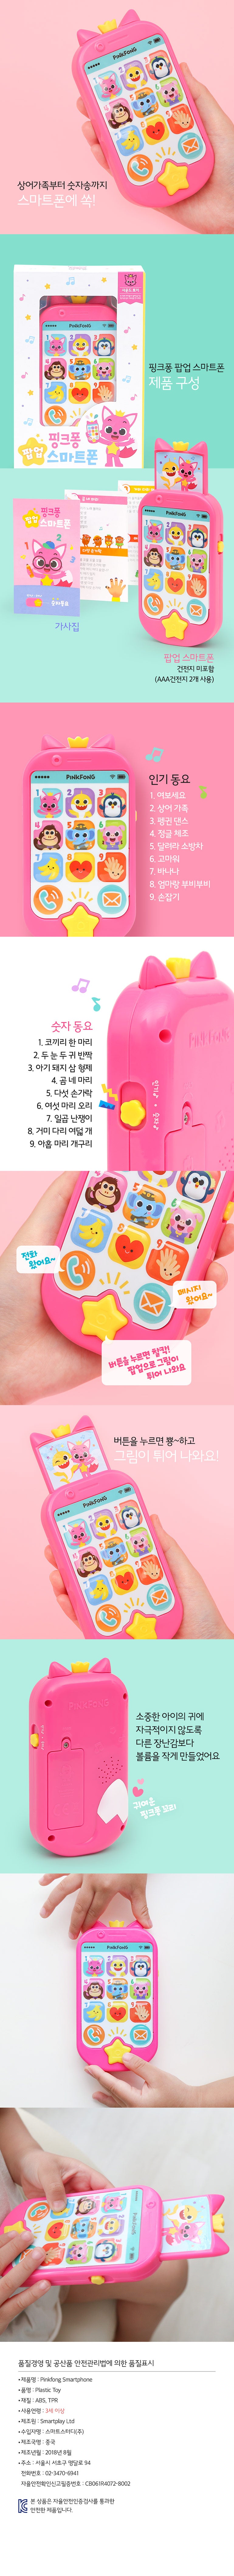 Pinkfong Pop Up Smartphone And Dual Pad Set_1